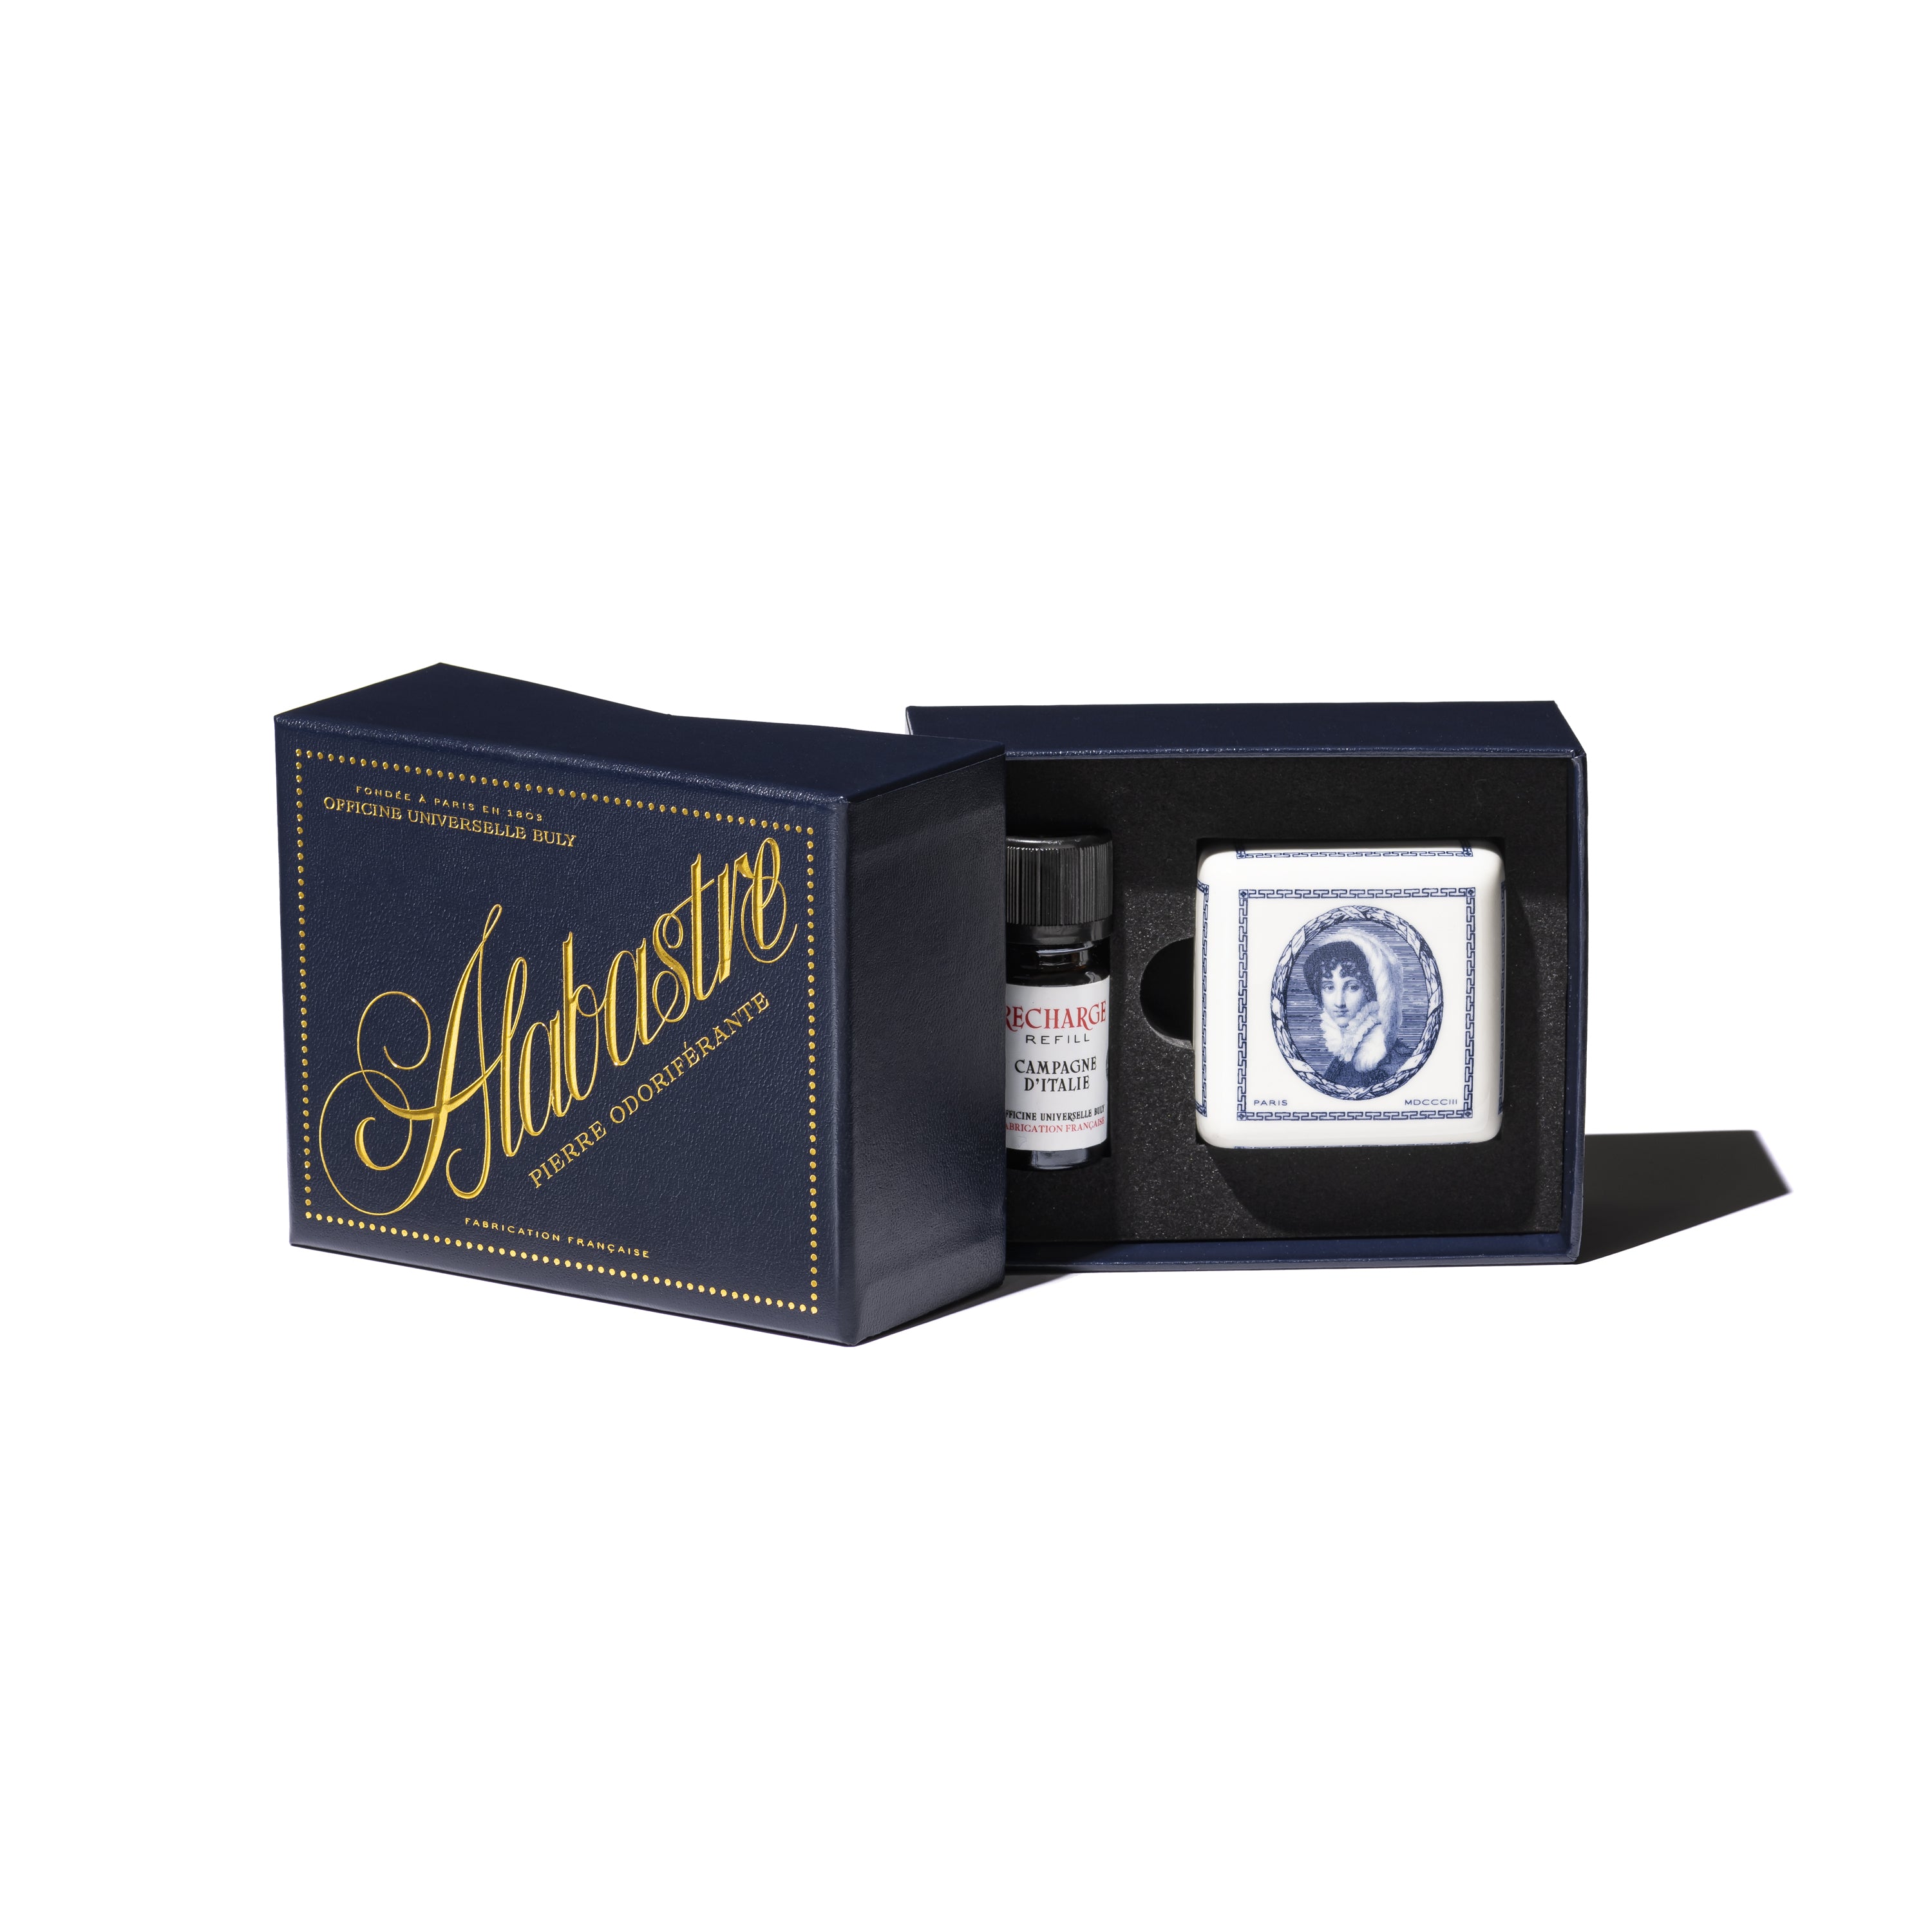 The Art of Gifting – Officine Universelle Buly